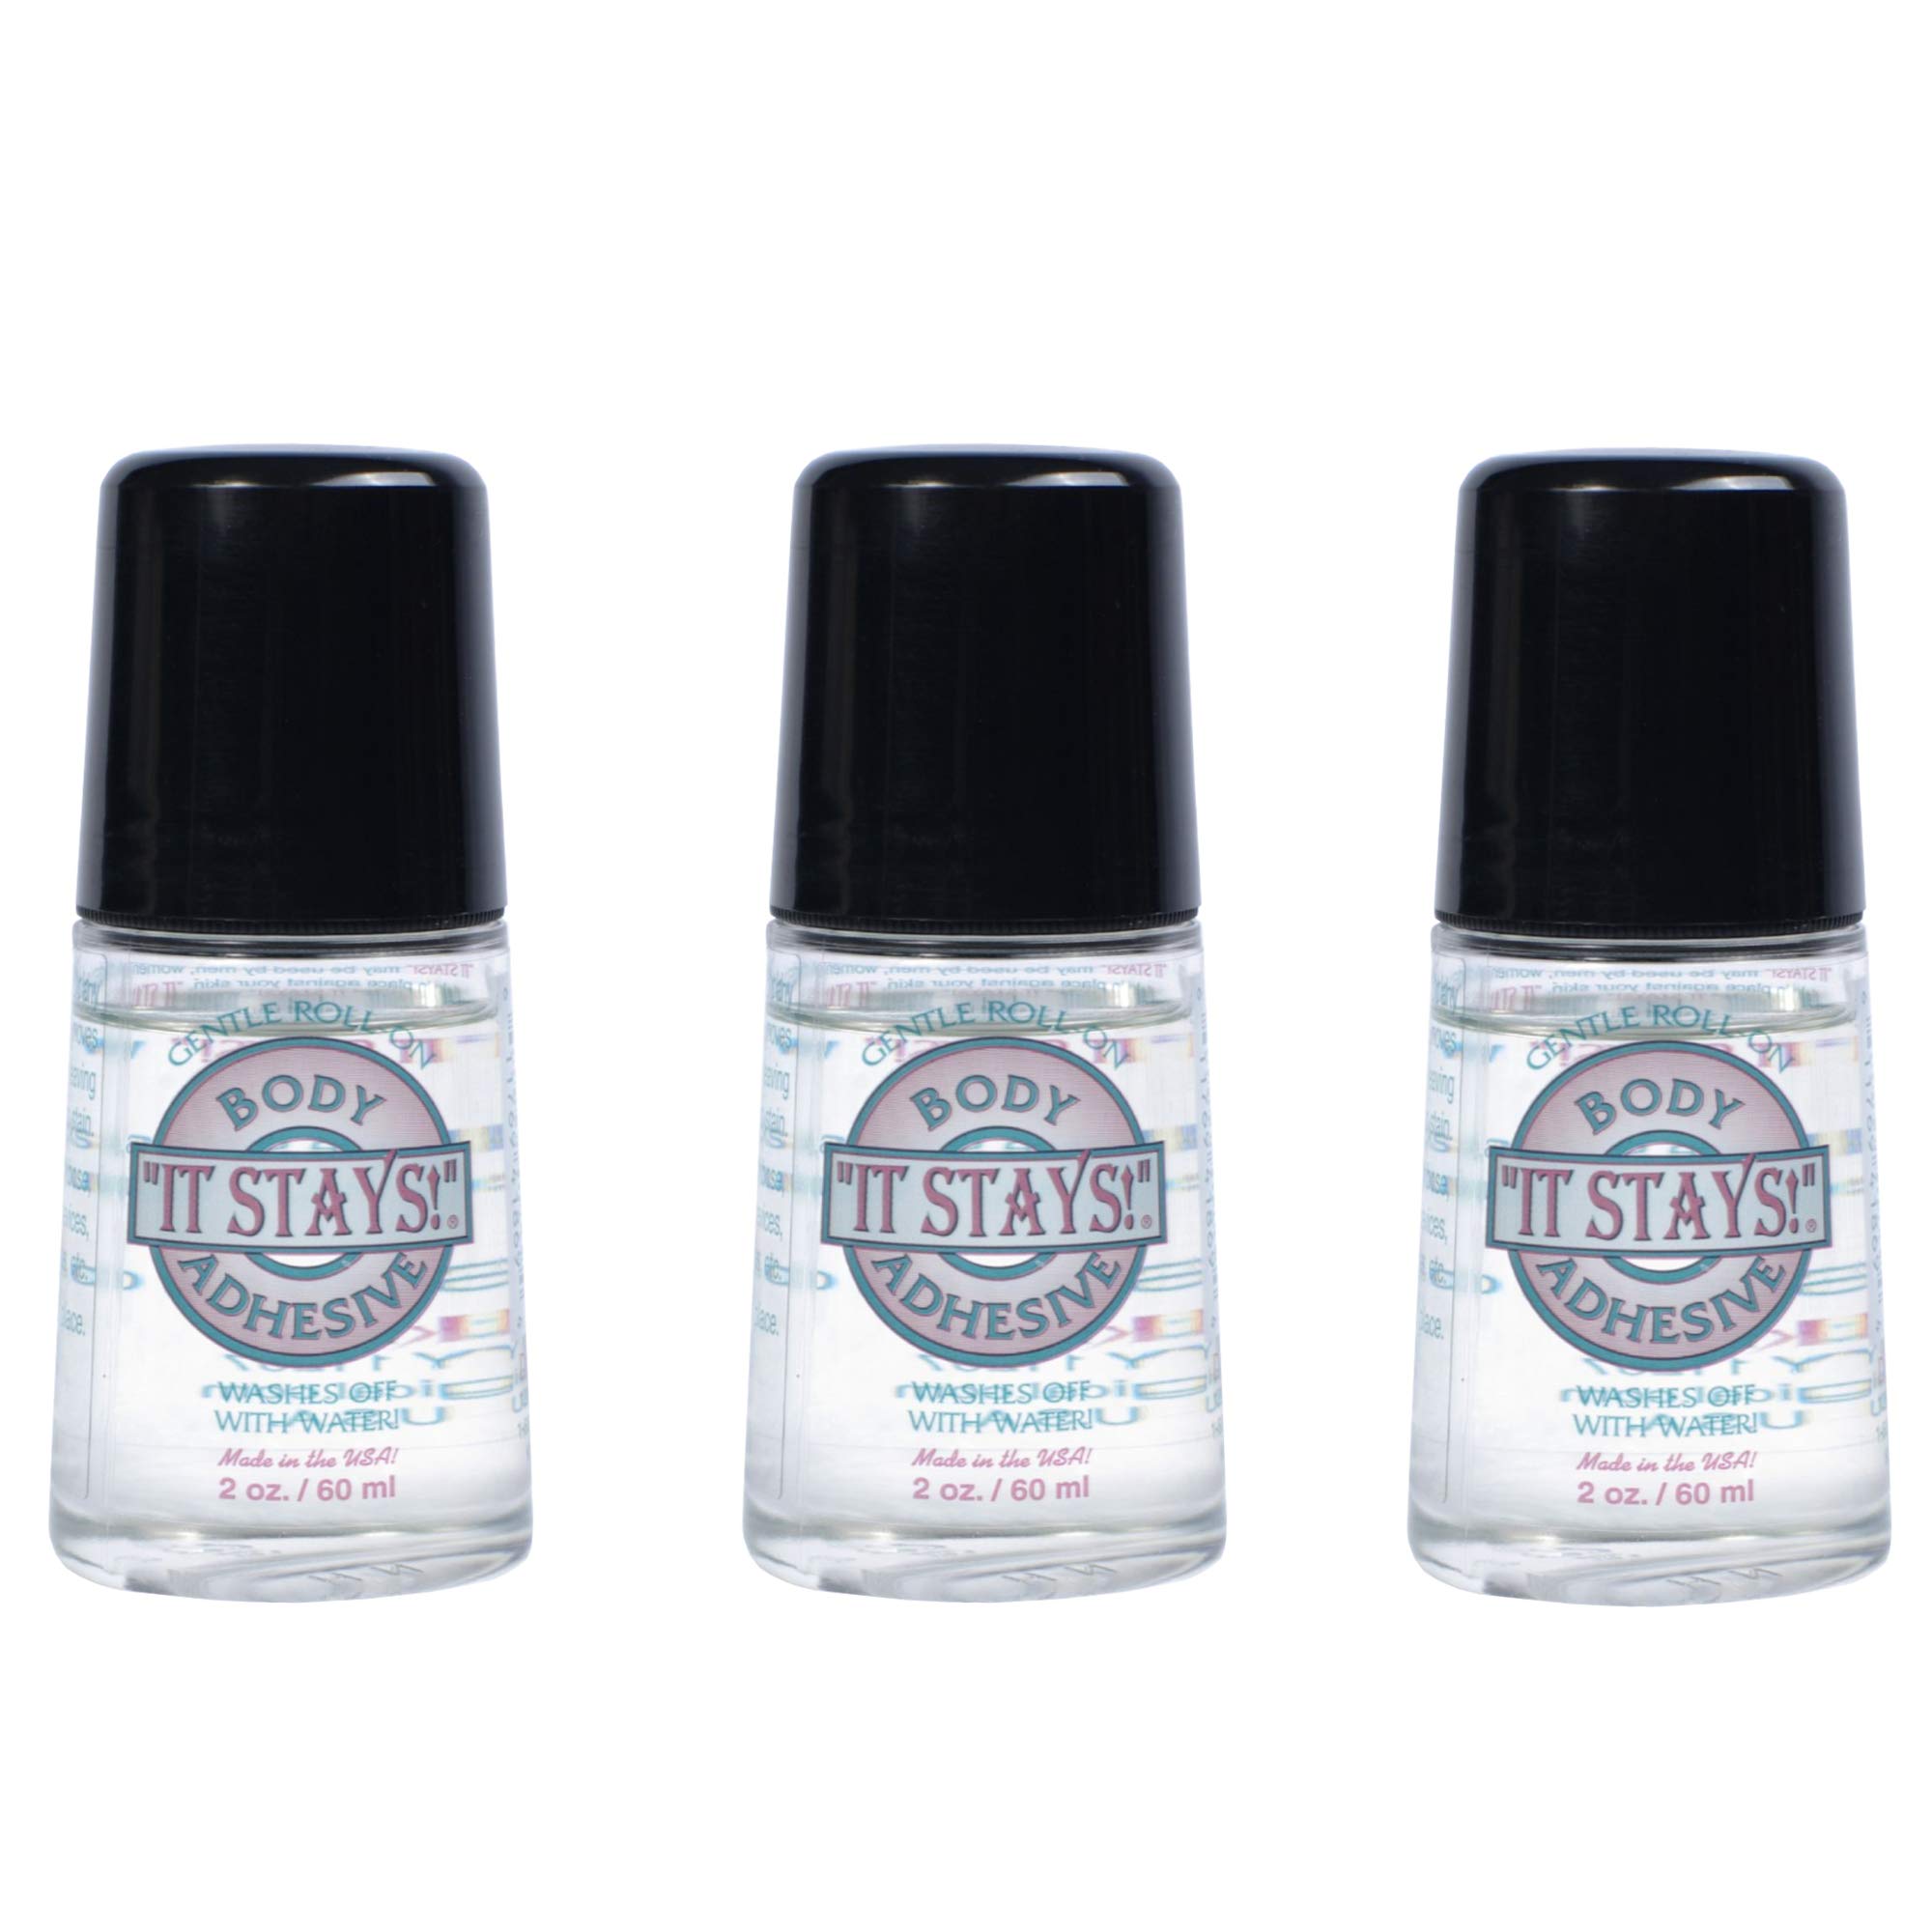 It Stays! Roll-On Body Adhesive 2 oz